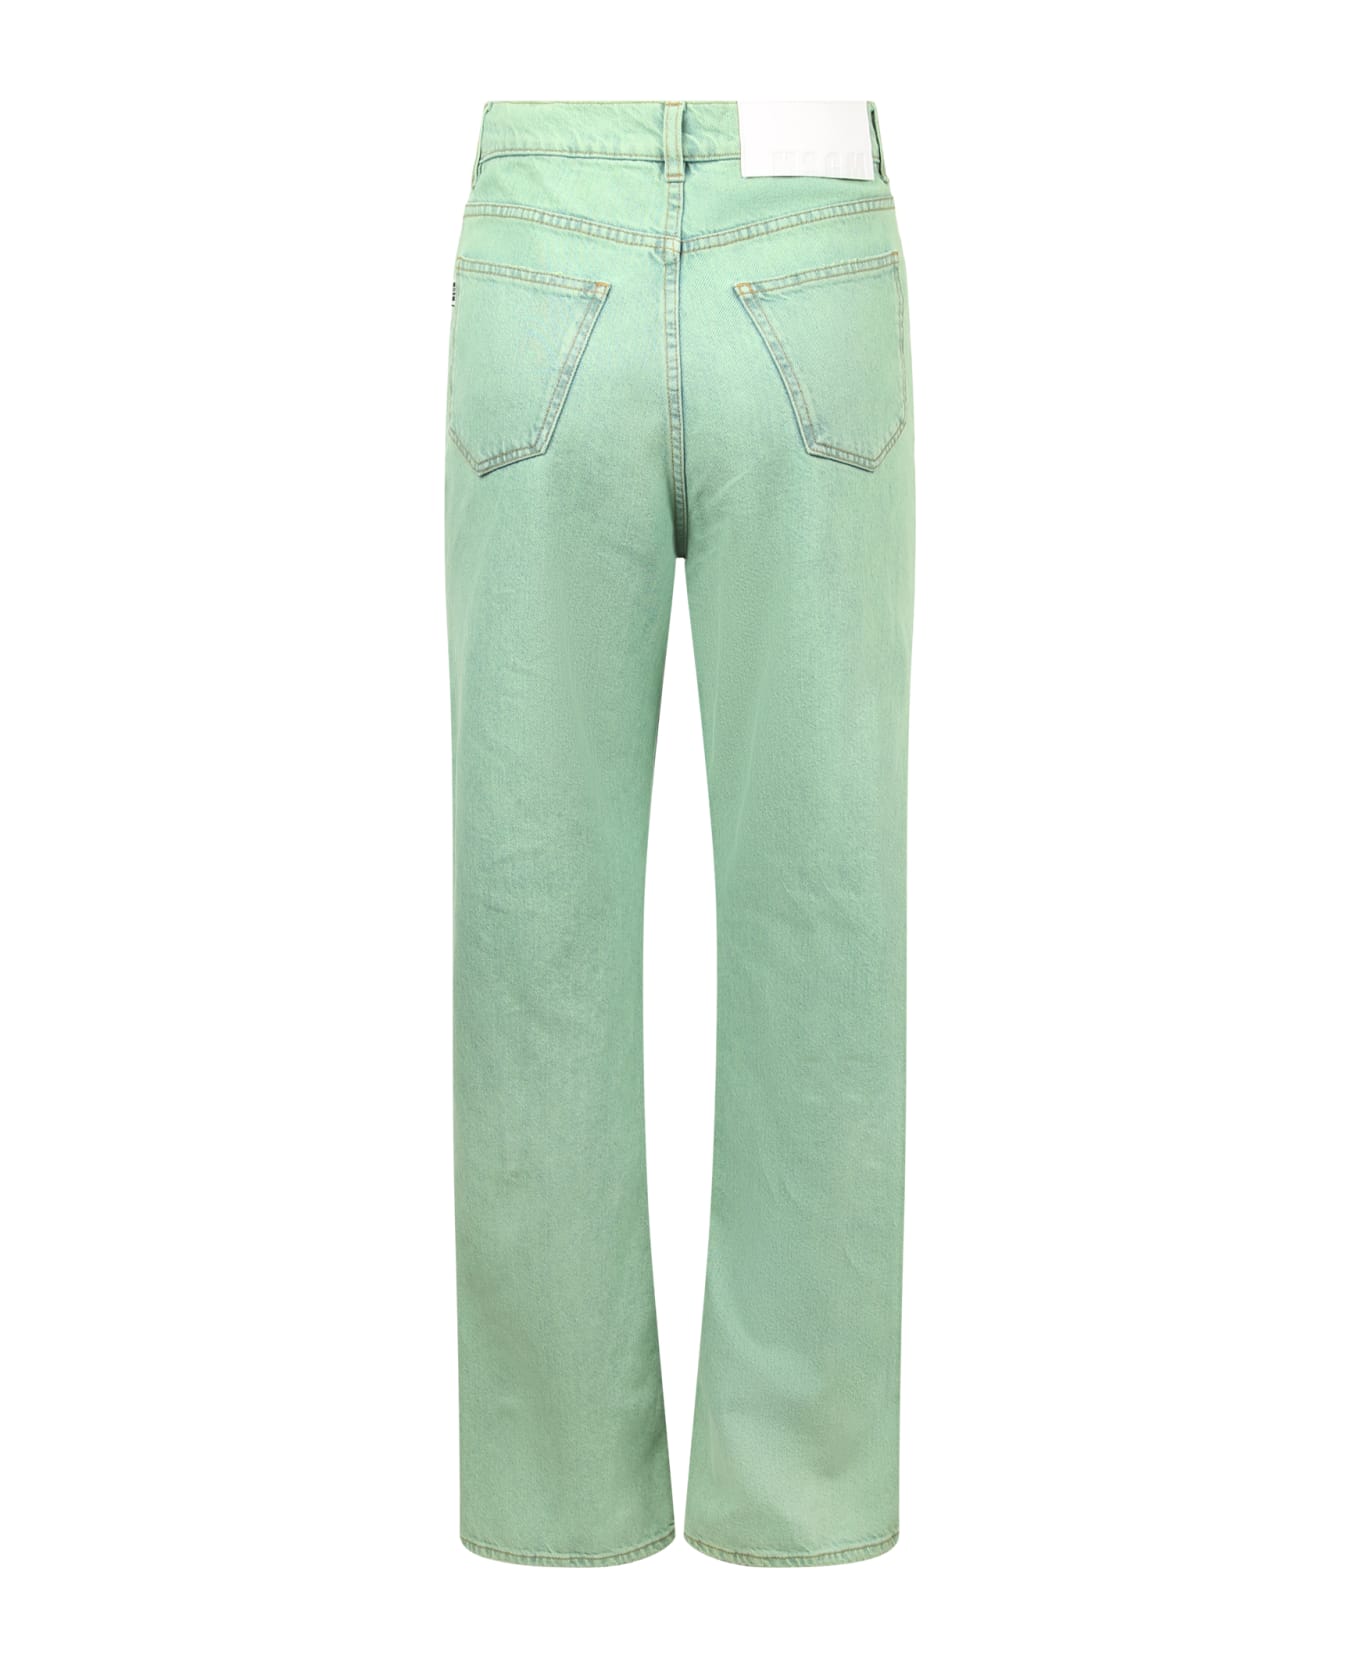 MSGM Jeans Destroyed Colored Verde - Green